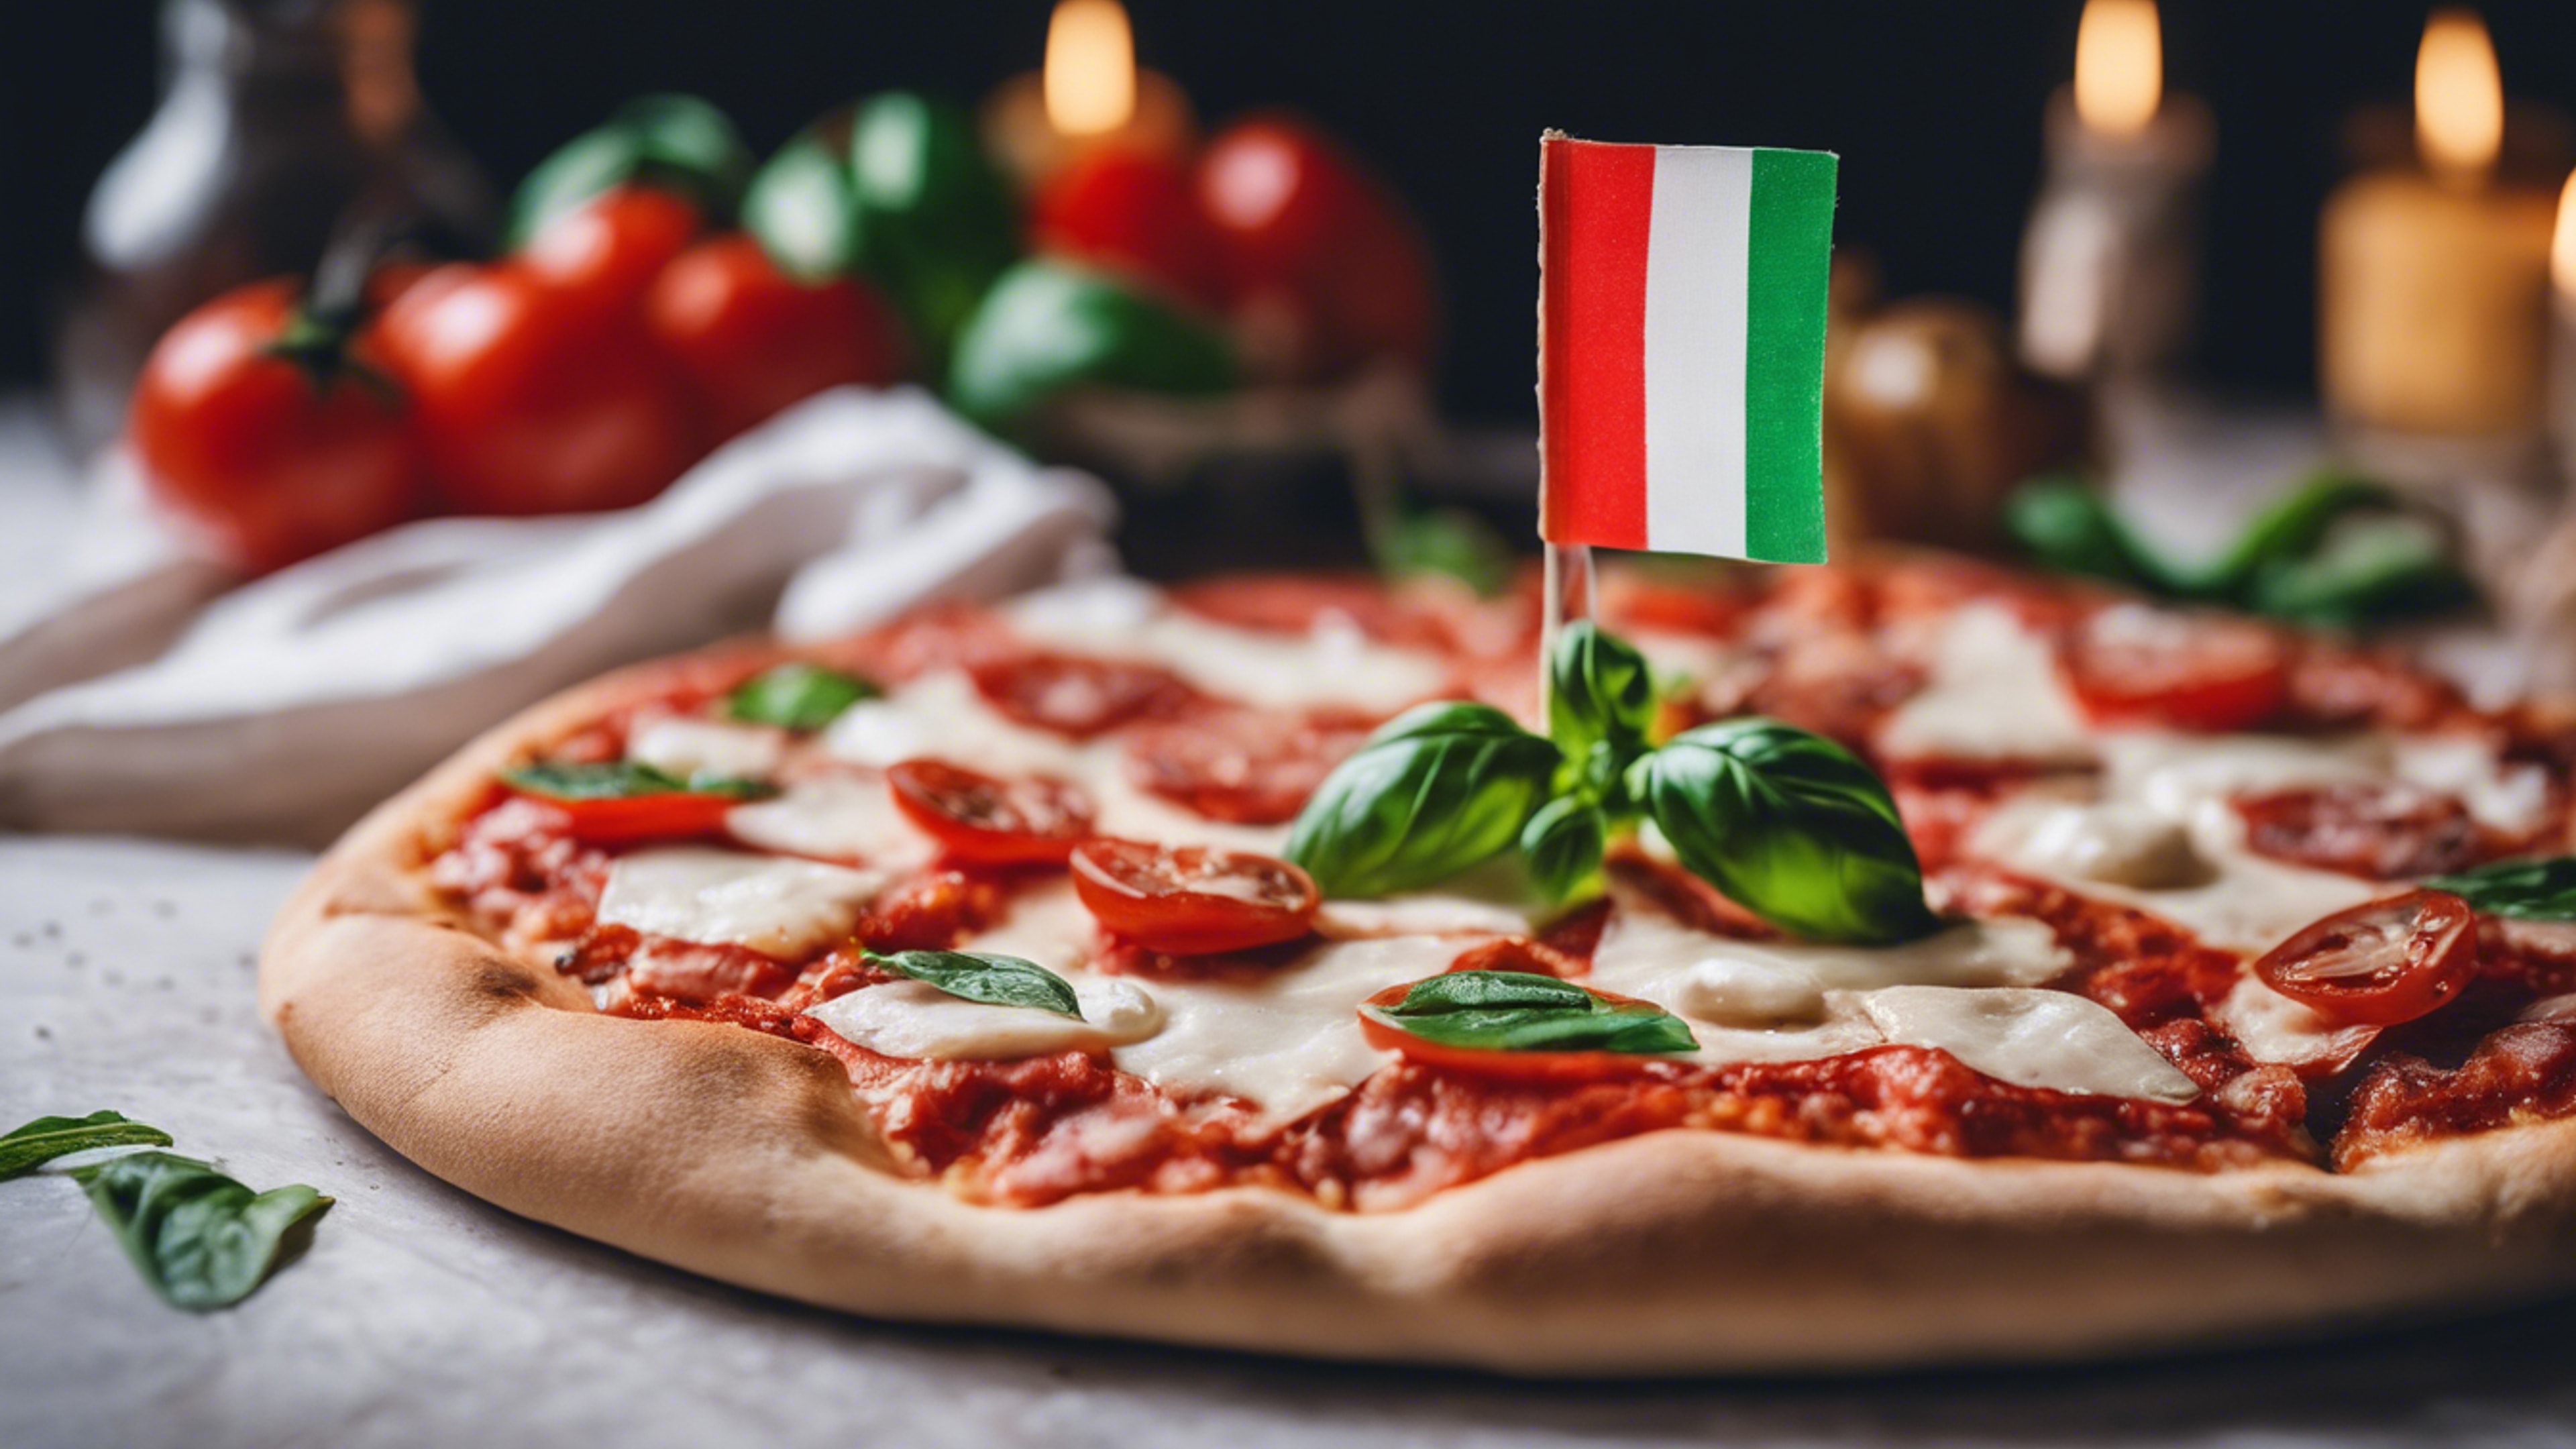 A delectable pizza margherita adorned with the vibrant colors of the Italian flag – green basil, white mozzarella, and red tomatoes. کاغذ دیواری[8d7c128777db467783aa]